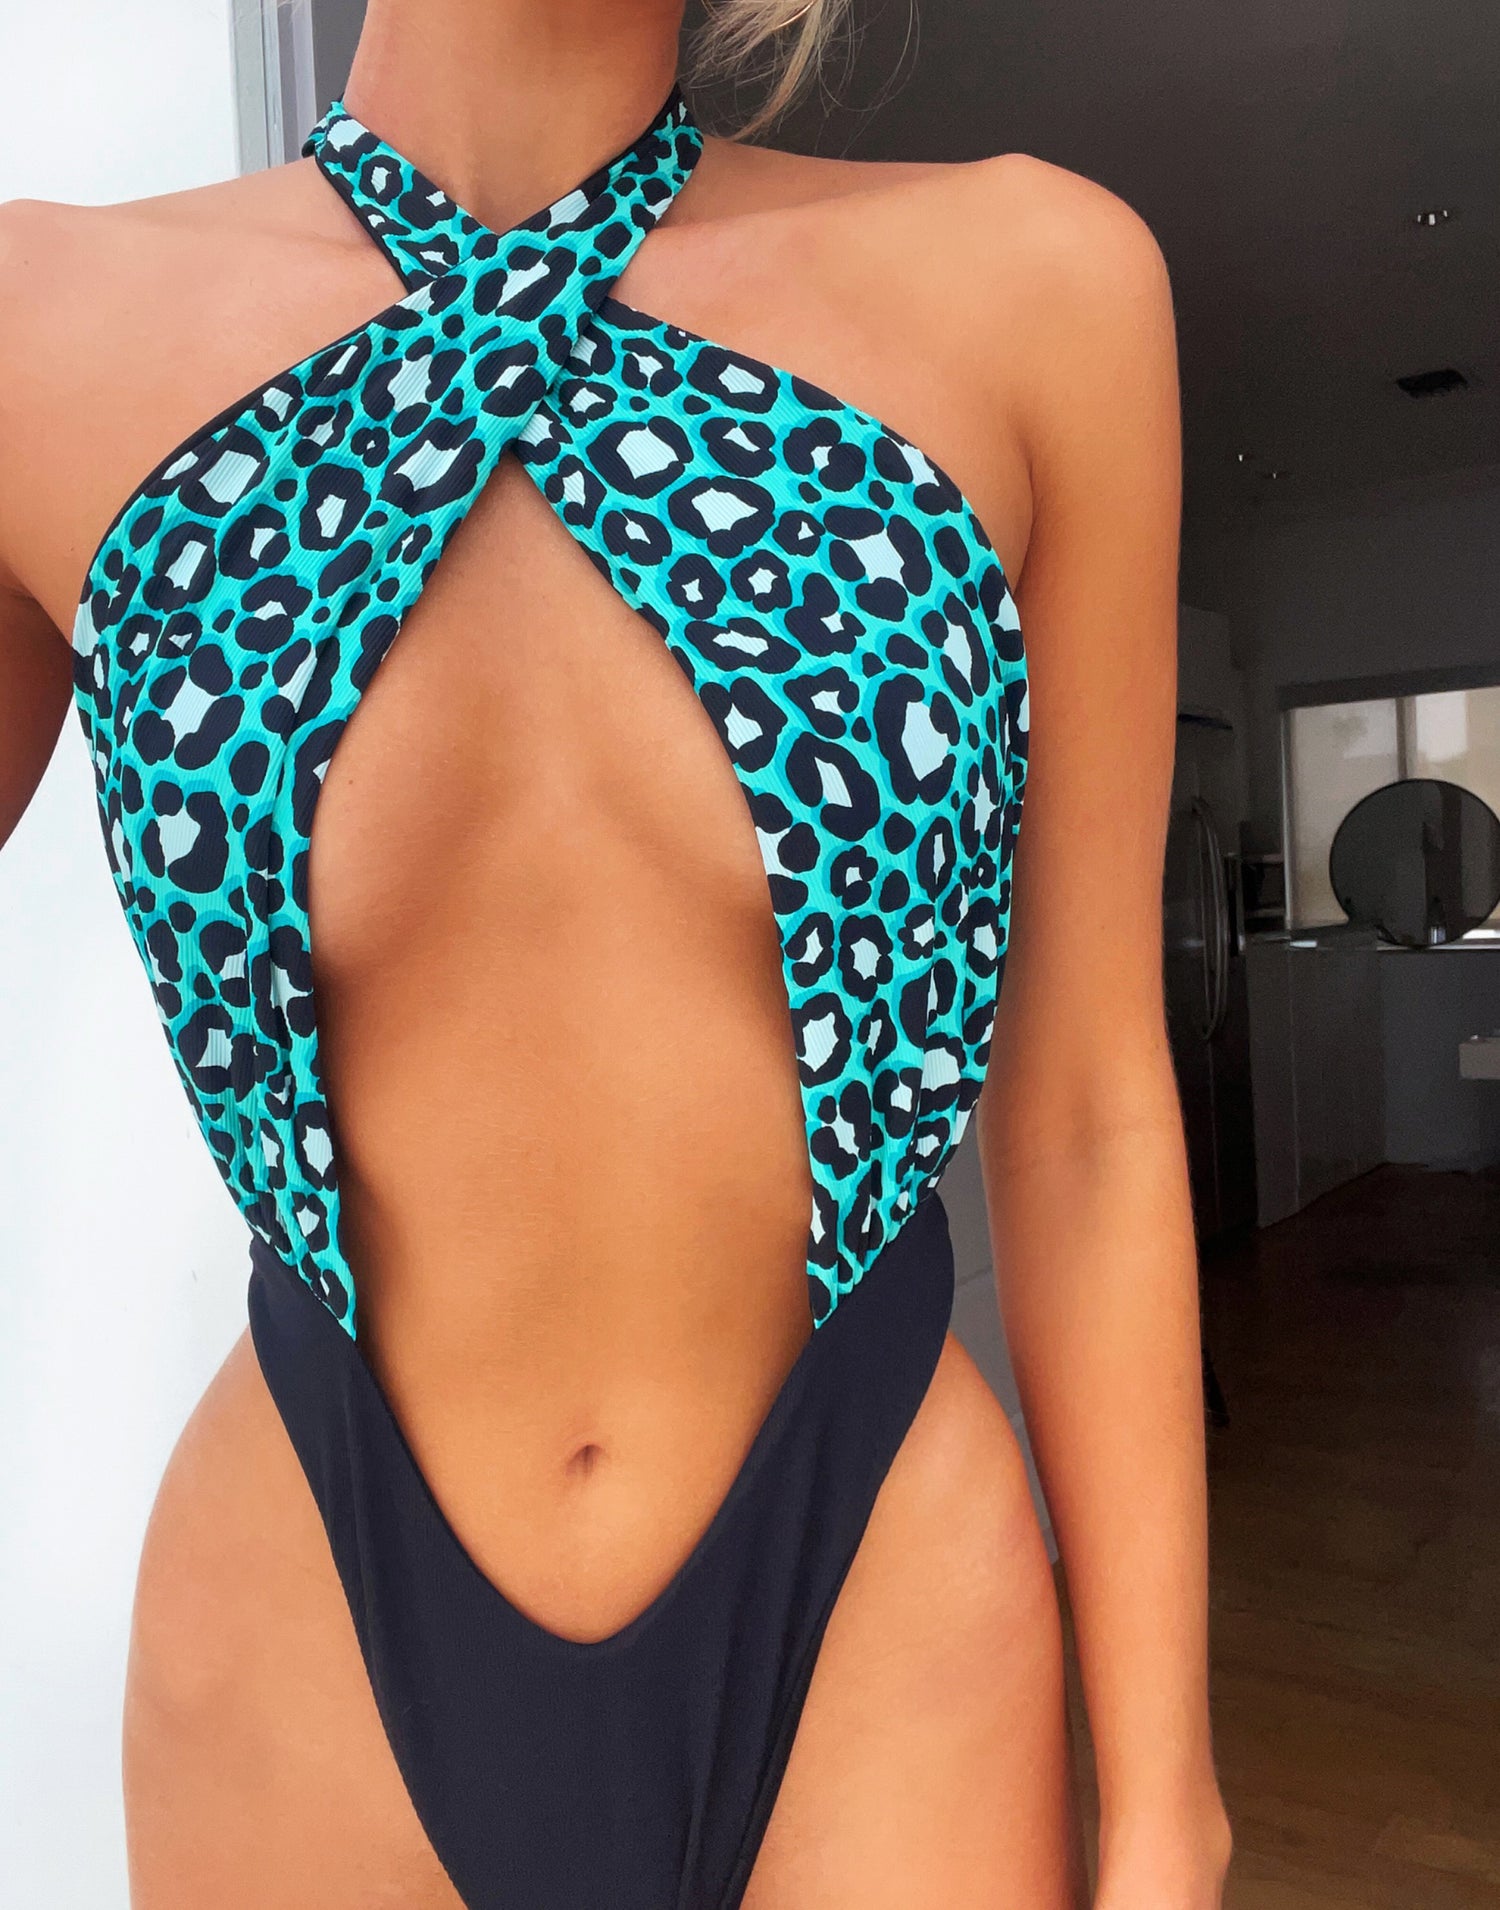 Lex Monokini Swimsuit in Teal Leopard with Minimal Coverage - Front Detail View 